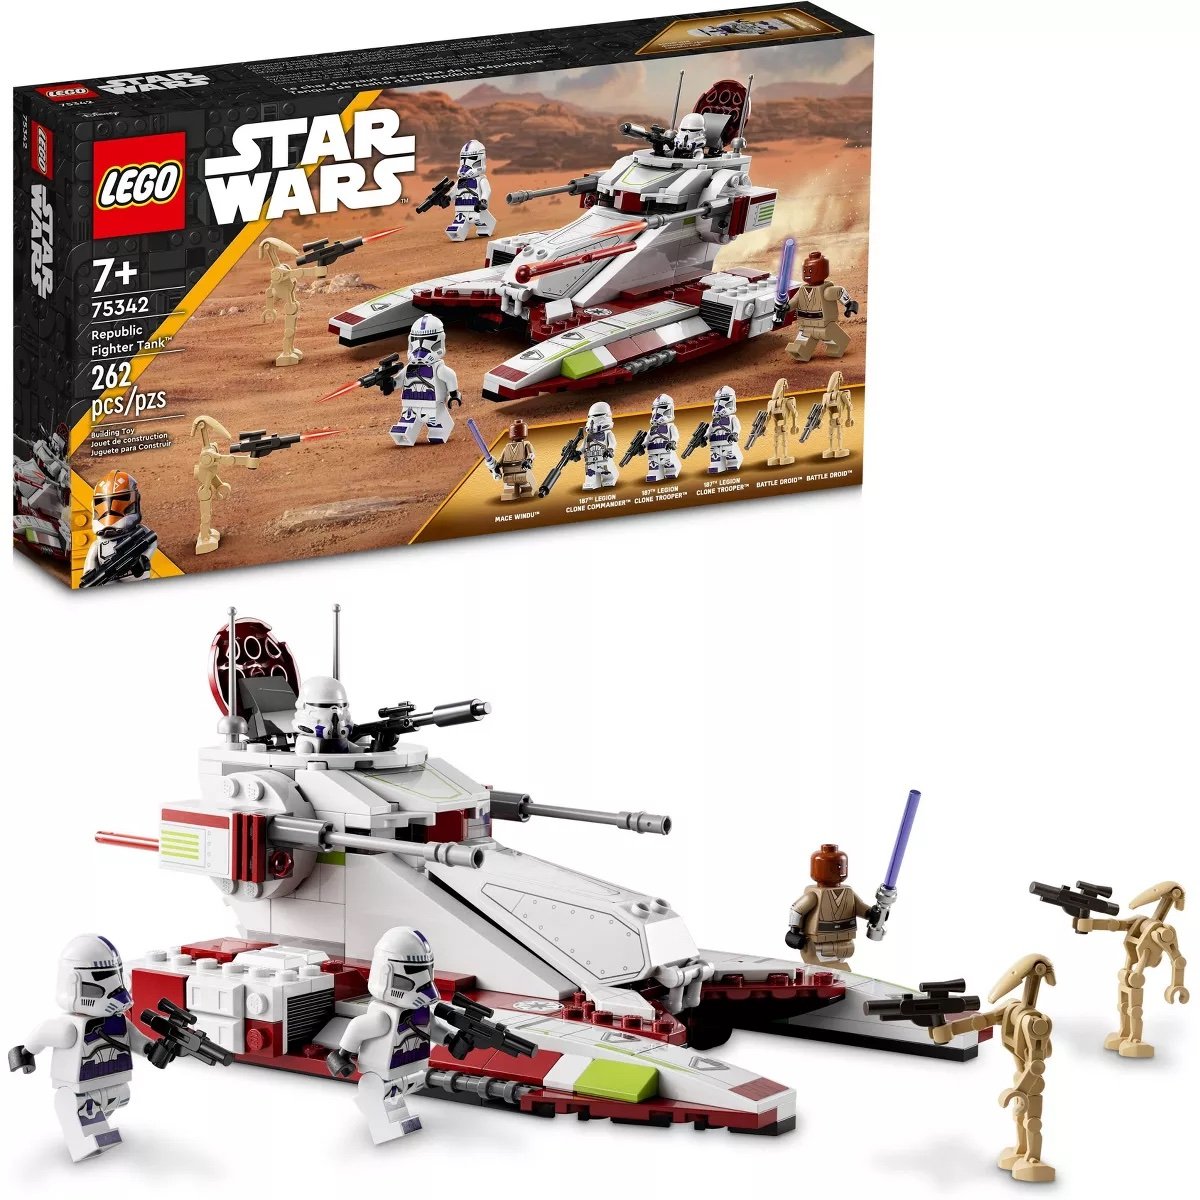 Up to 40% off LEGO sets